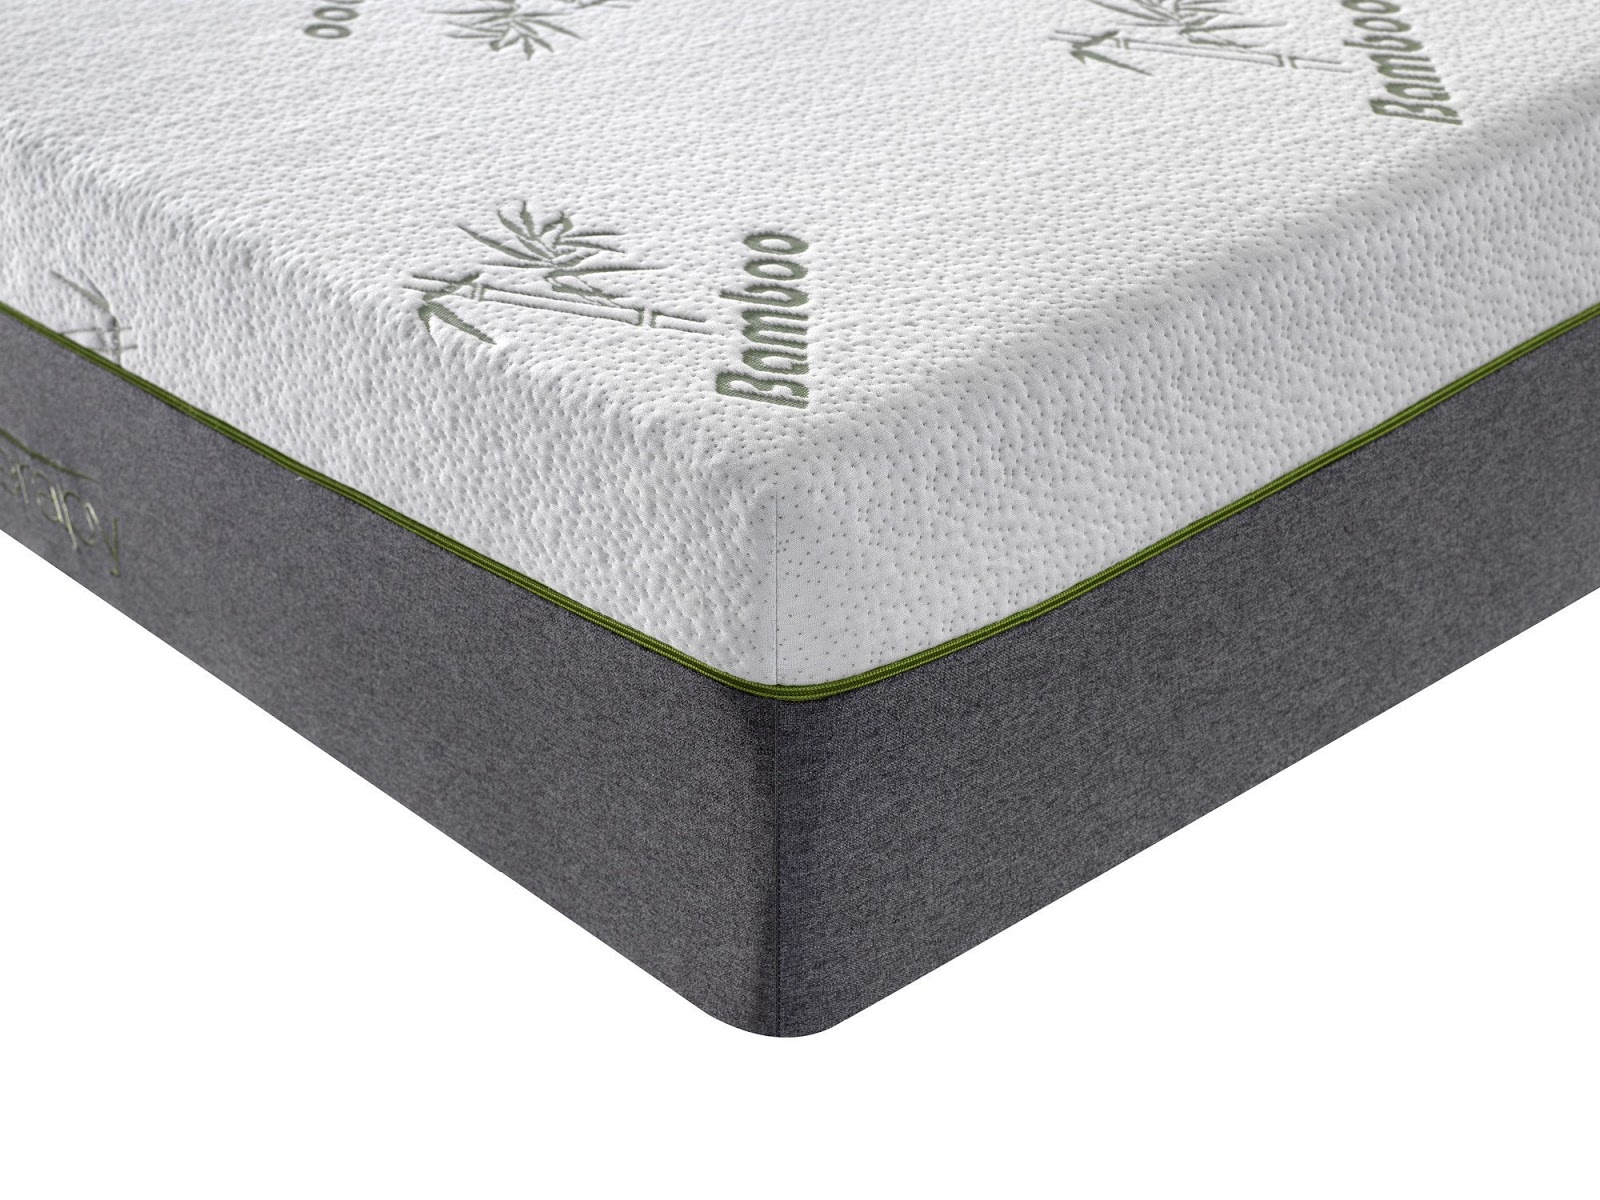 memory foam king mattress with hypoallergenic bamboo cover